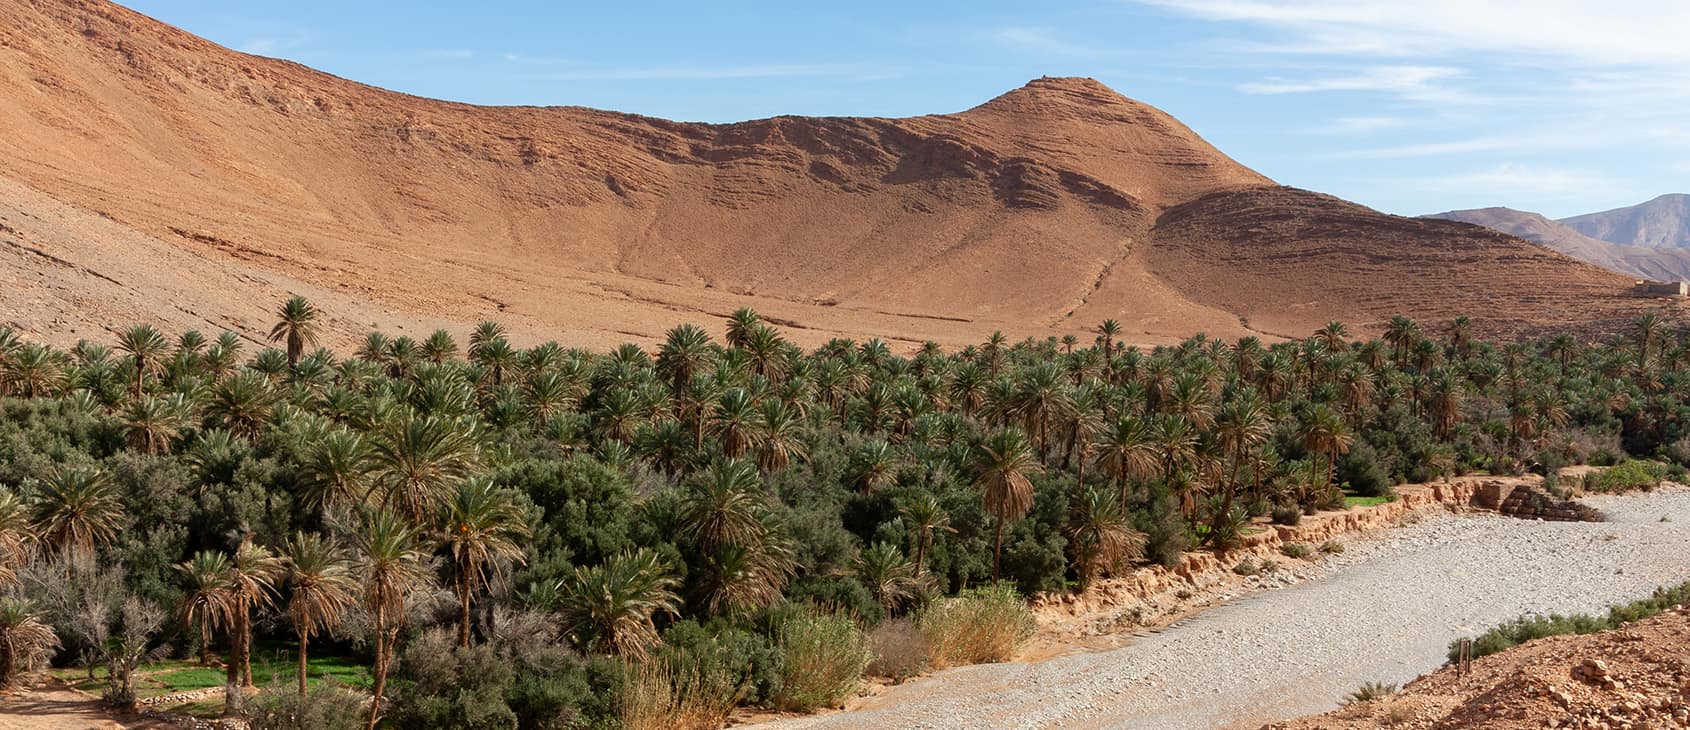 Date palm trees, southern Morocco